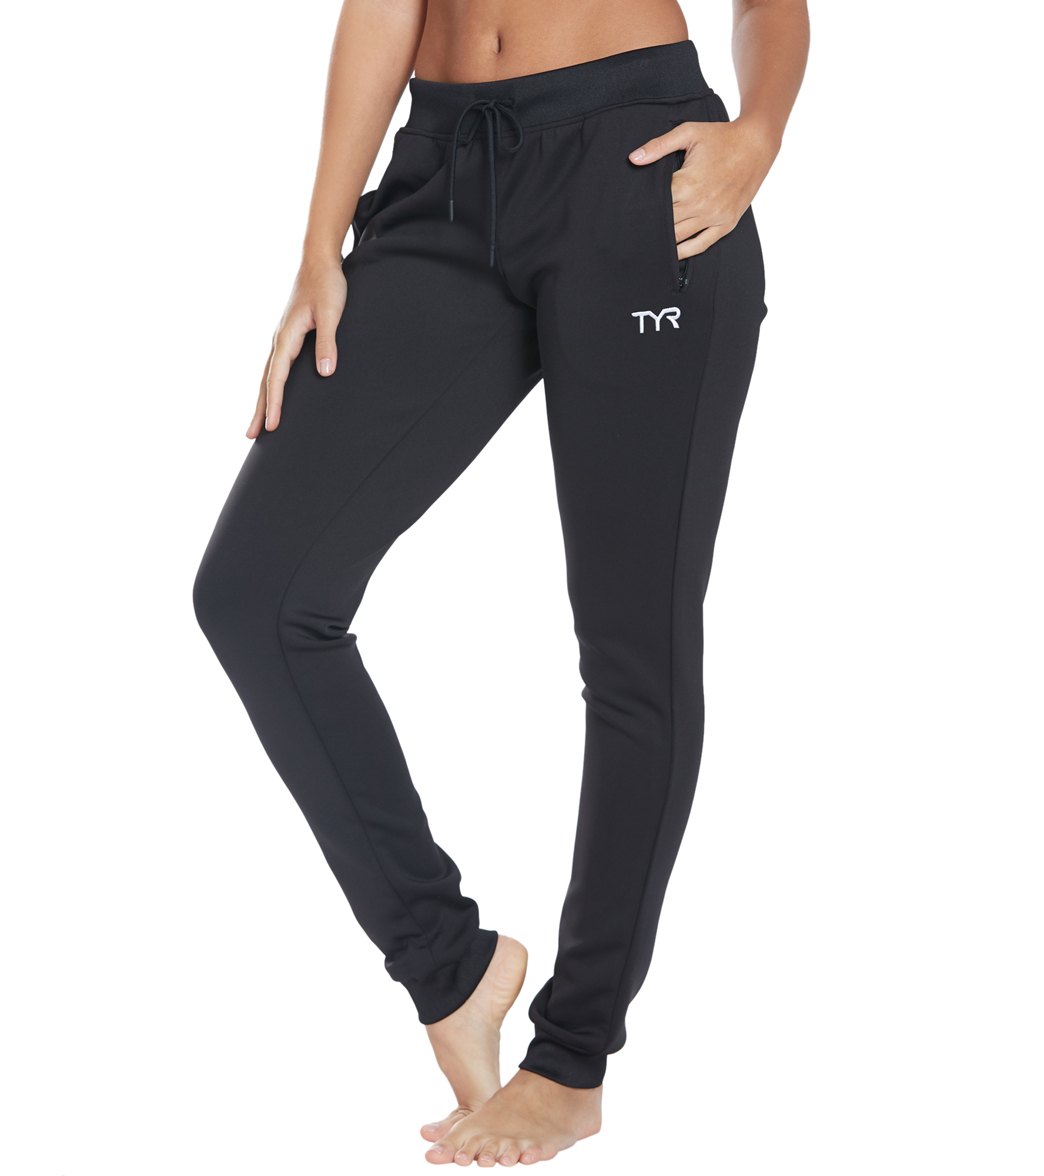 Gottex Women's Workout Pants Size Small Leggings Black White Phone Pocket  Side c - $25 - From April